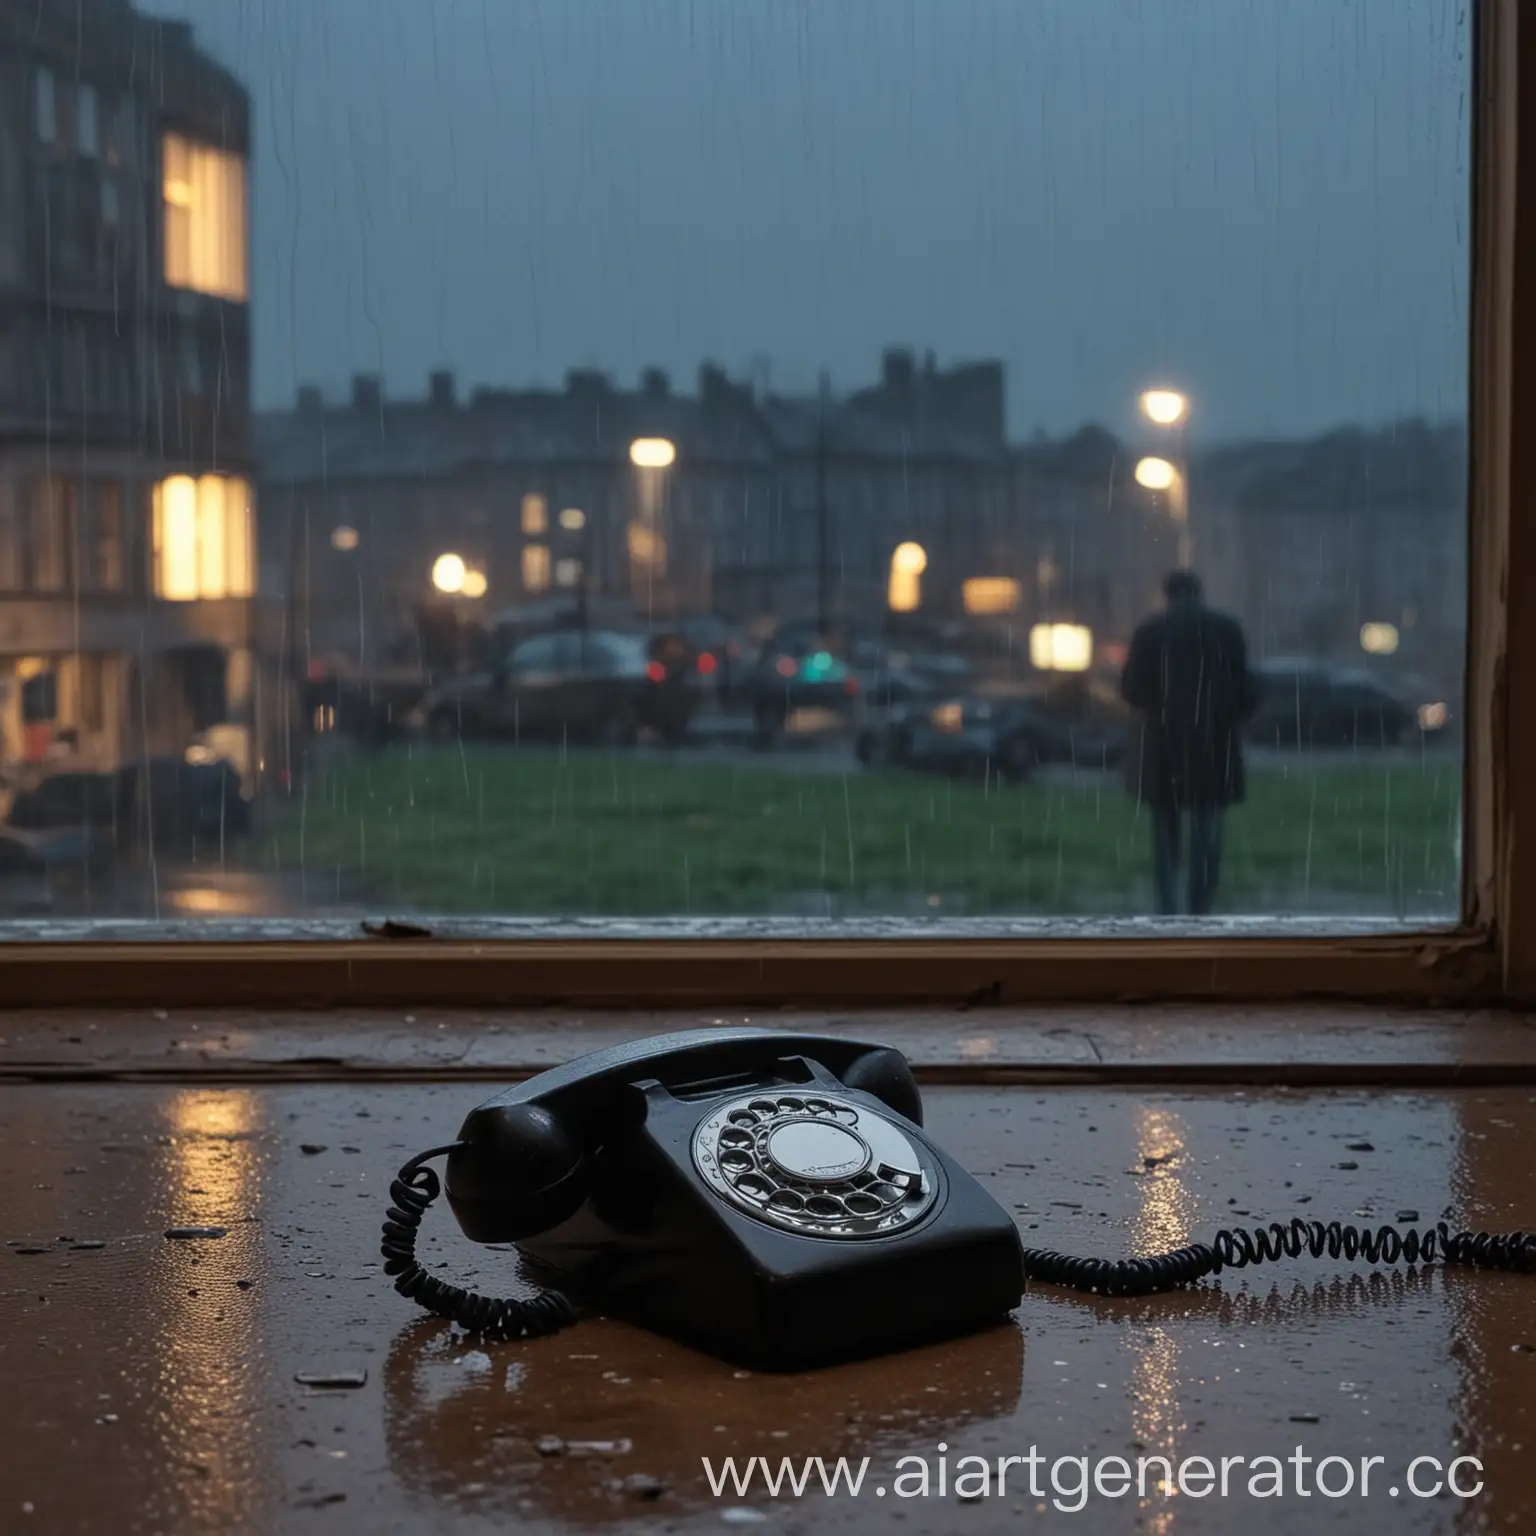 Vintage-Telephone-with-Detached-Handset-and-Rainy-Night-Scene